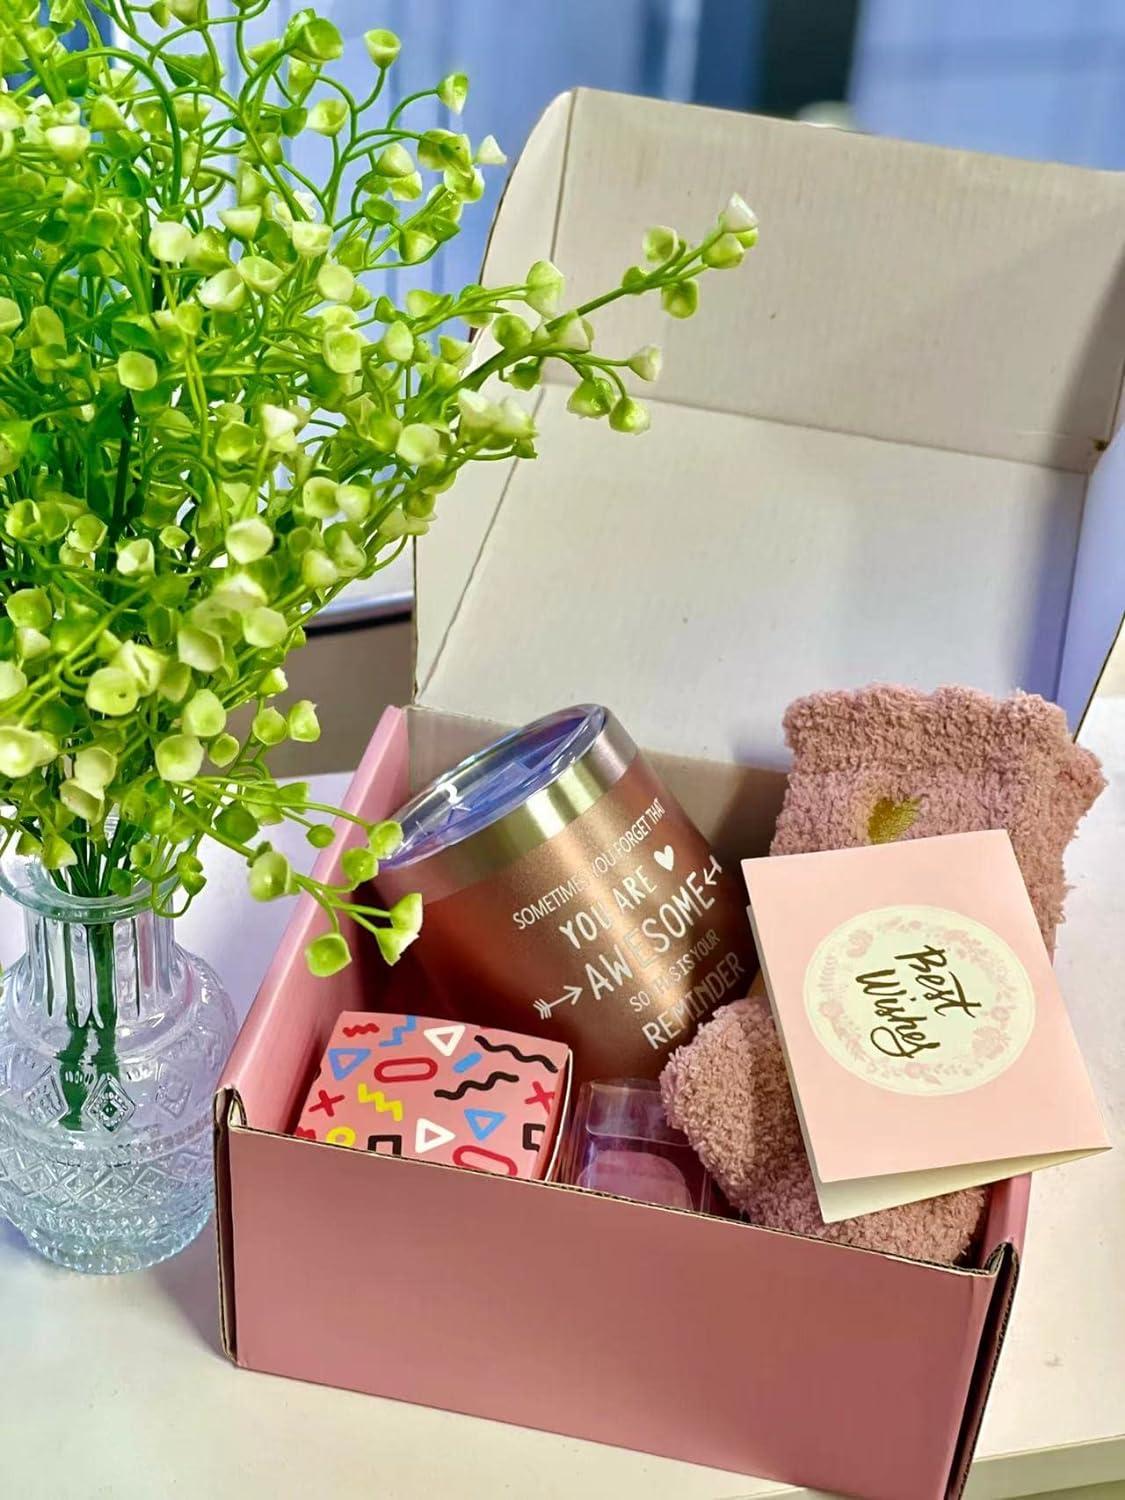 40th Birthday Gifts for Women, Personalized Relaxing Spa Gift Box Basket  for Sister Girlfriend Wife Best Friend Grandma Mom Daughter, Gifts for  Women